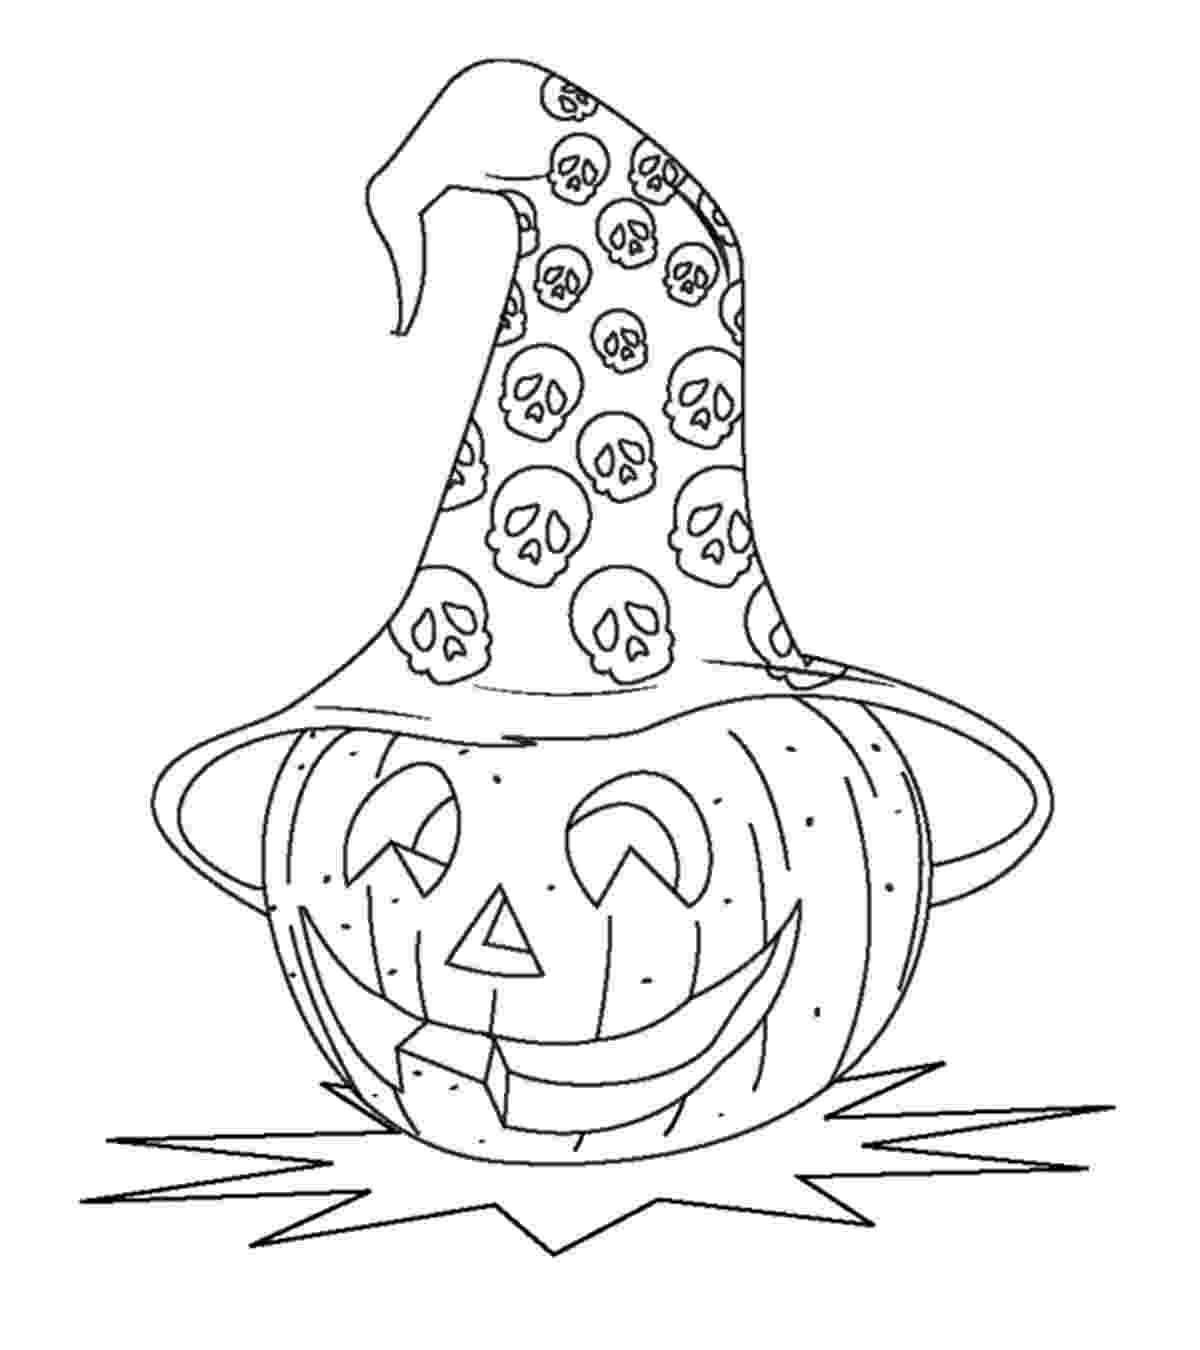 halloween pumpkin pictures to print and color coloring pages cute halloween for kids torun rsd7 org to and color halloween pictures pumpkin print 